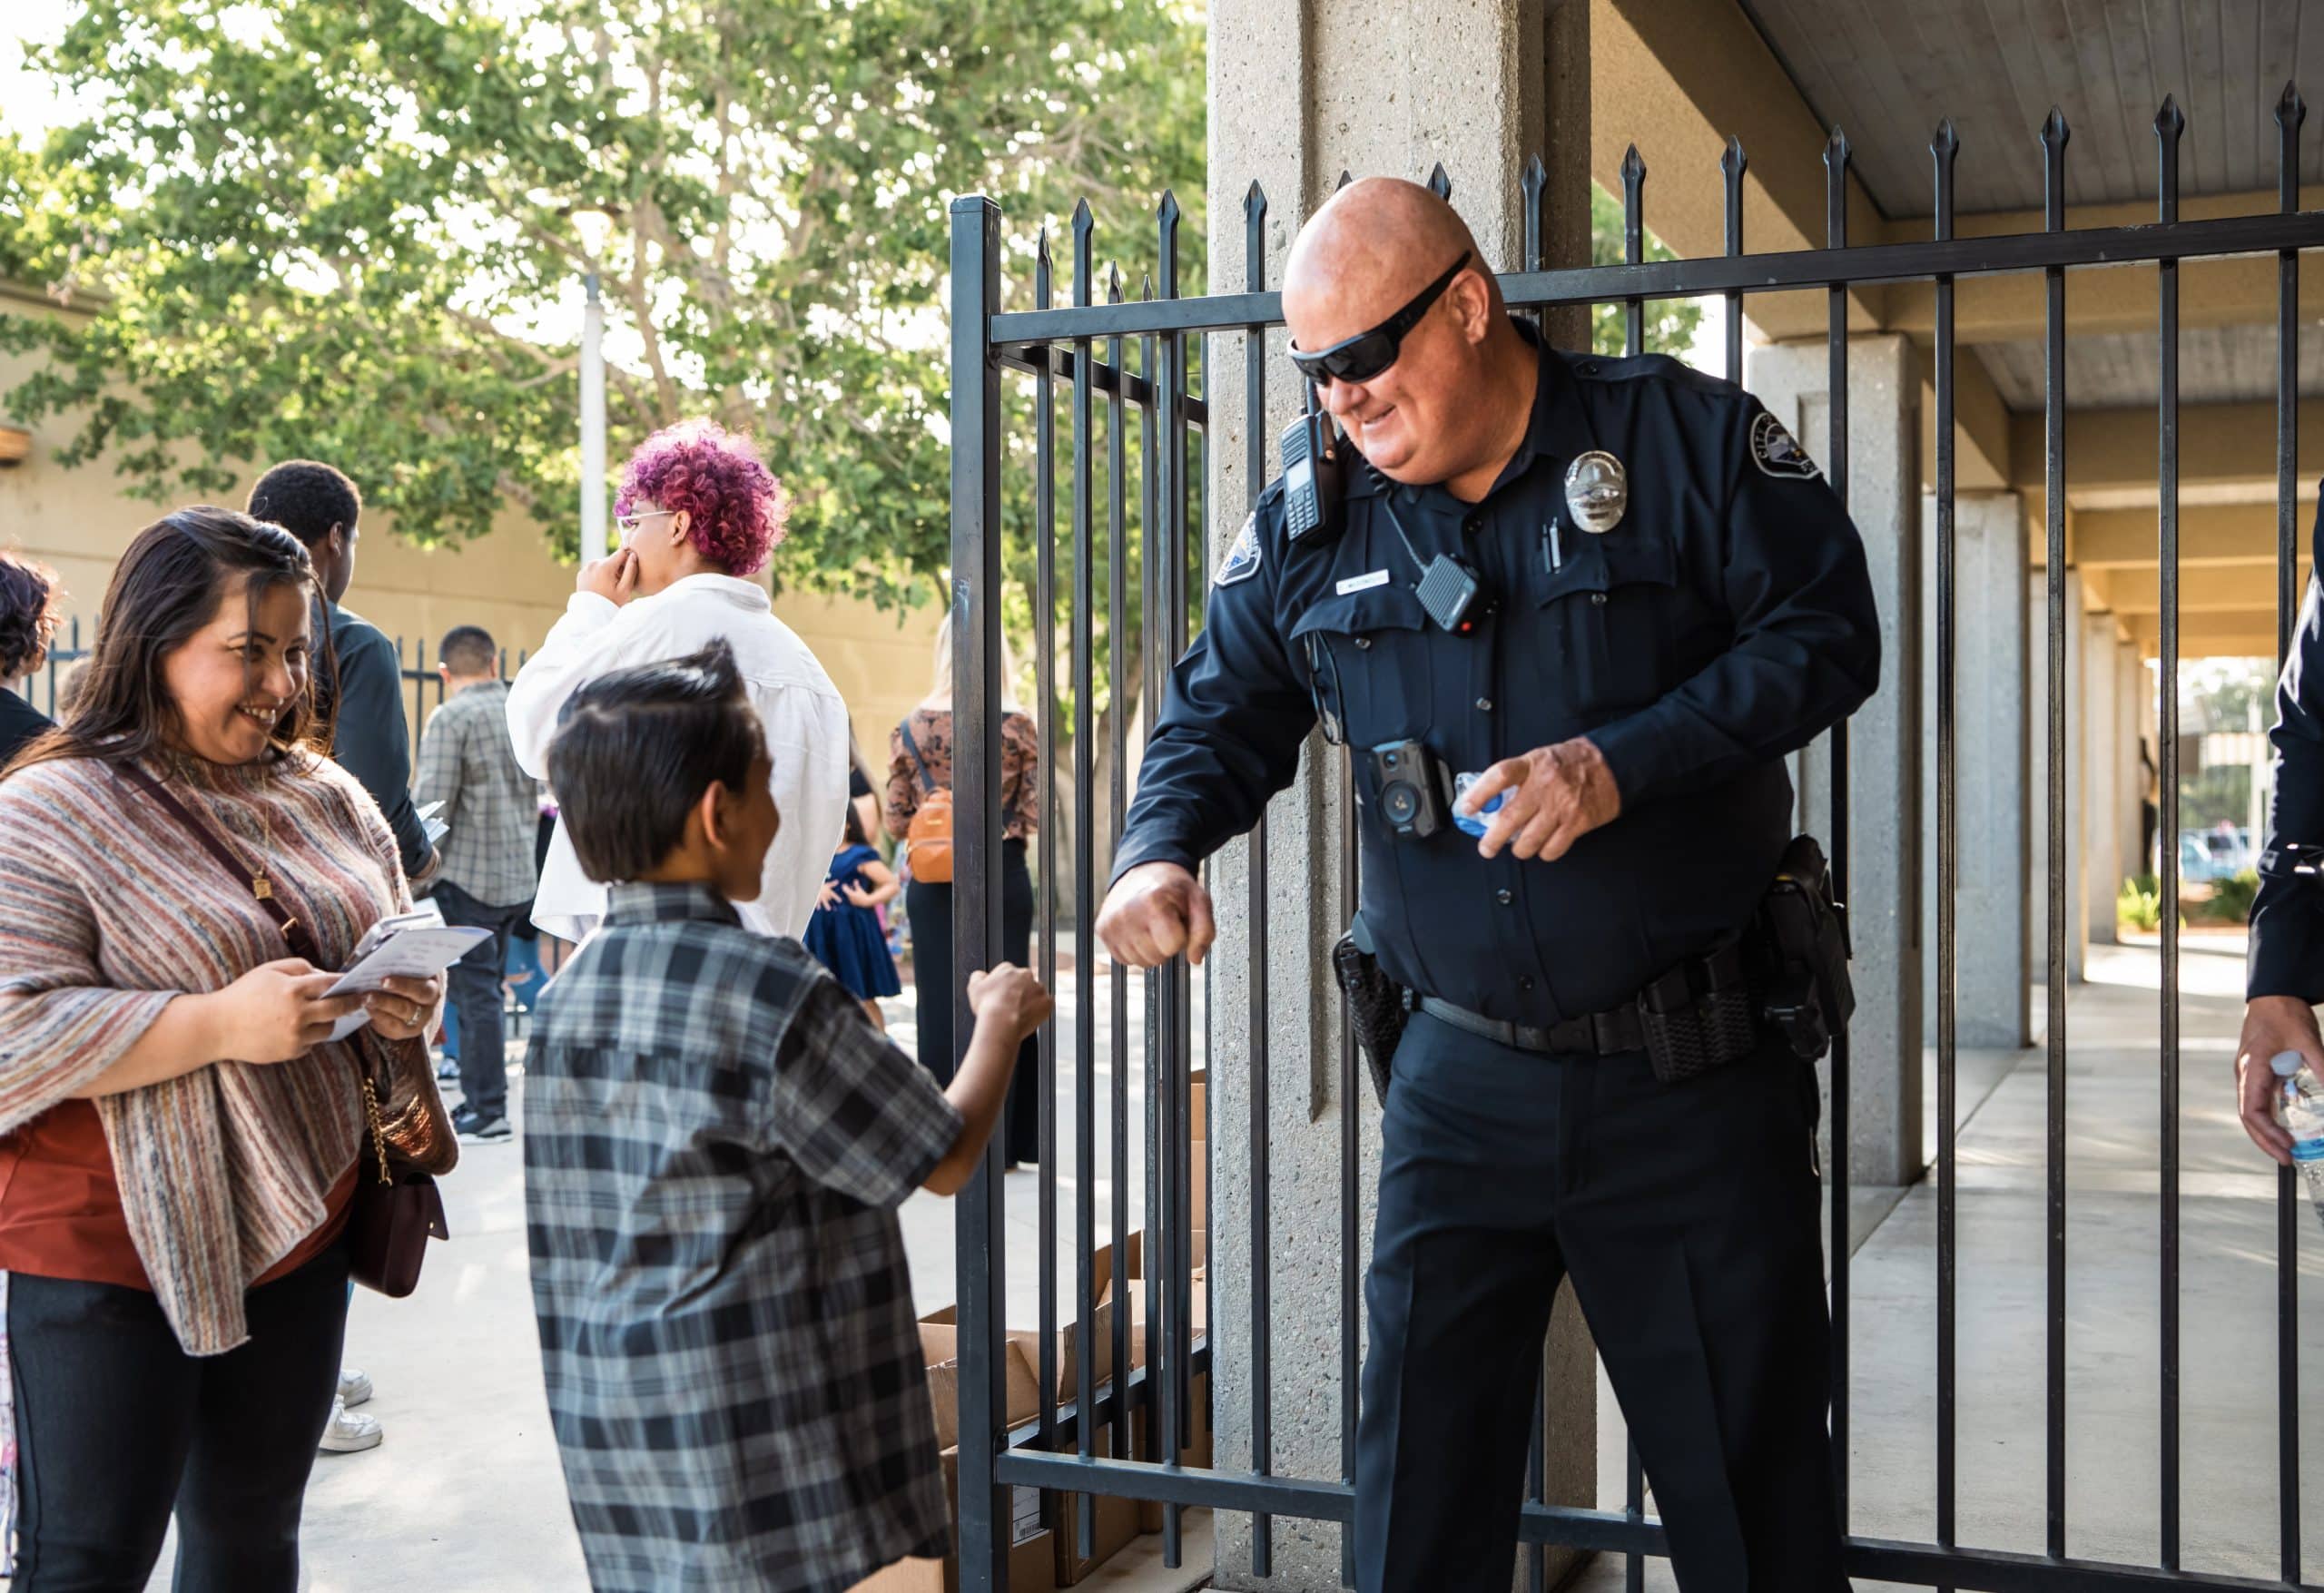 Hemet PD Officer interacting with students on school campus